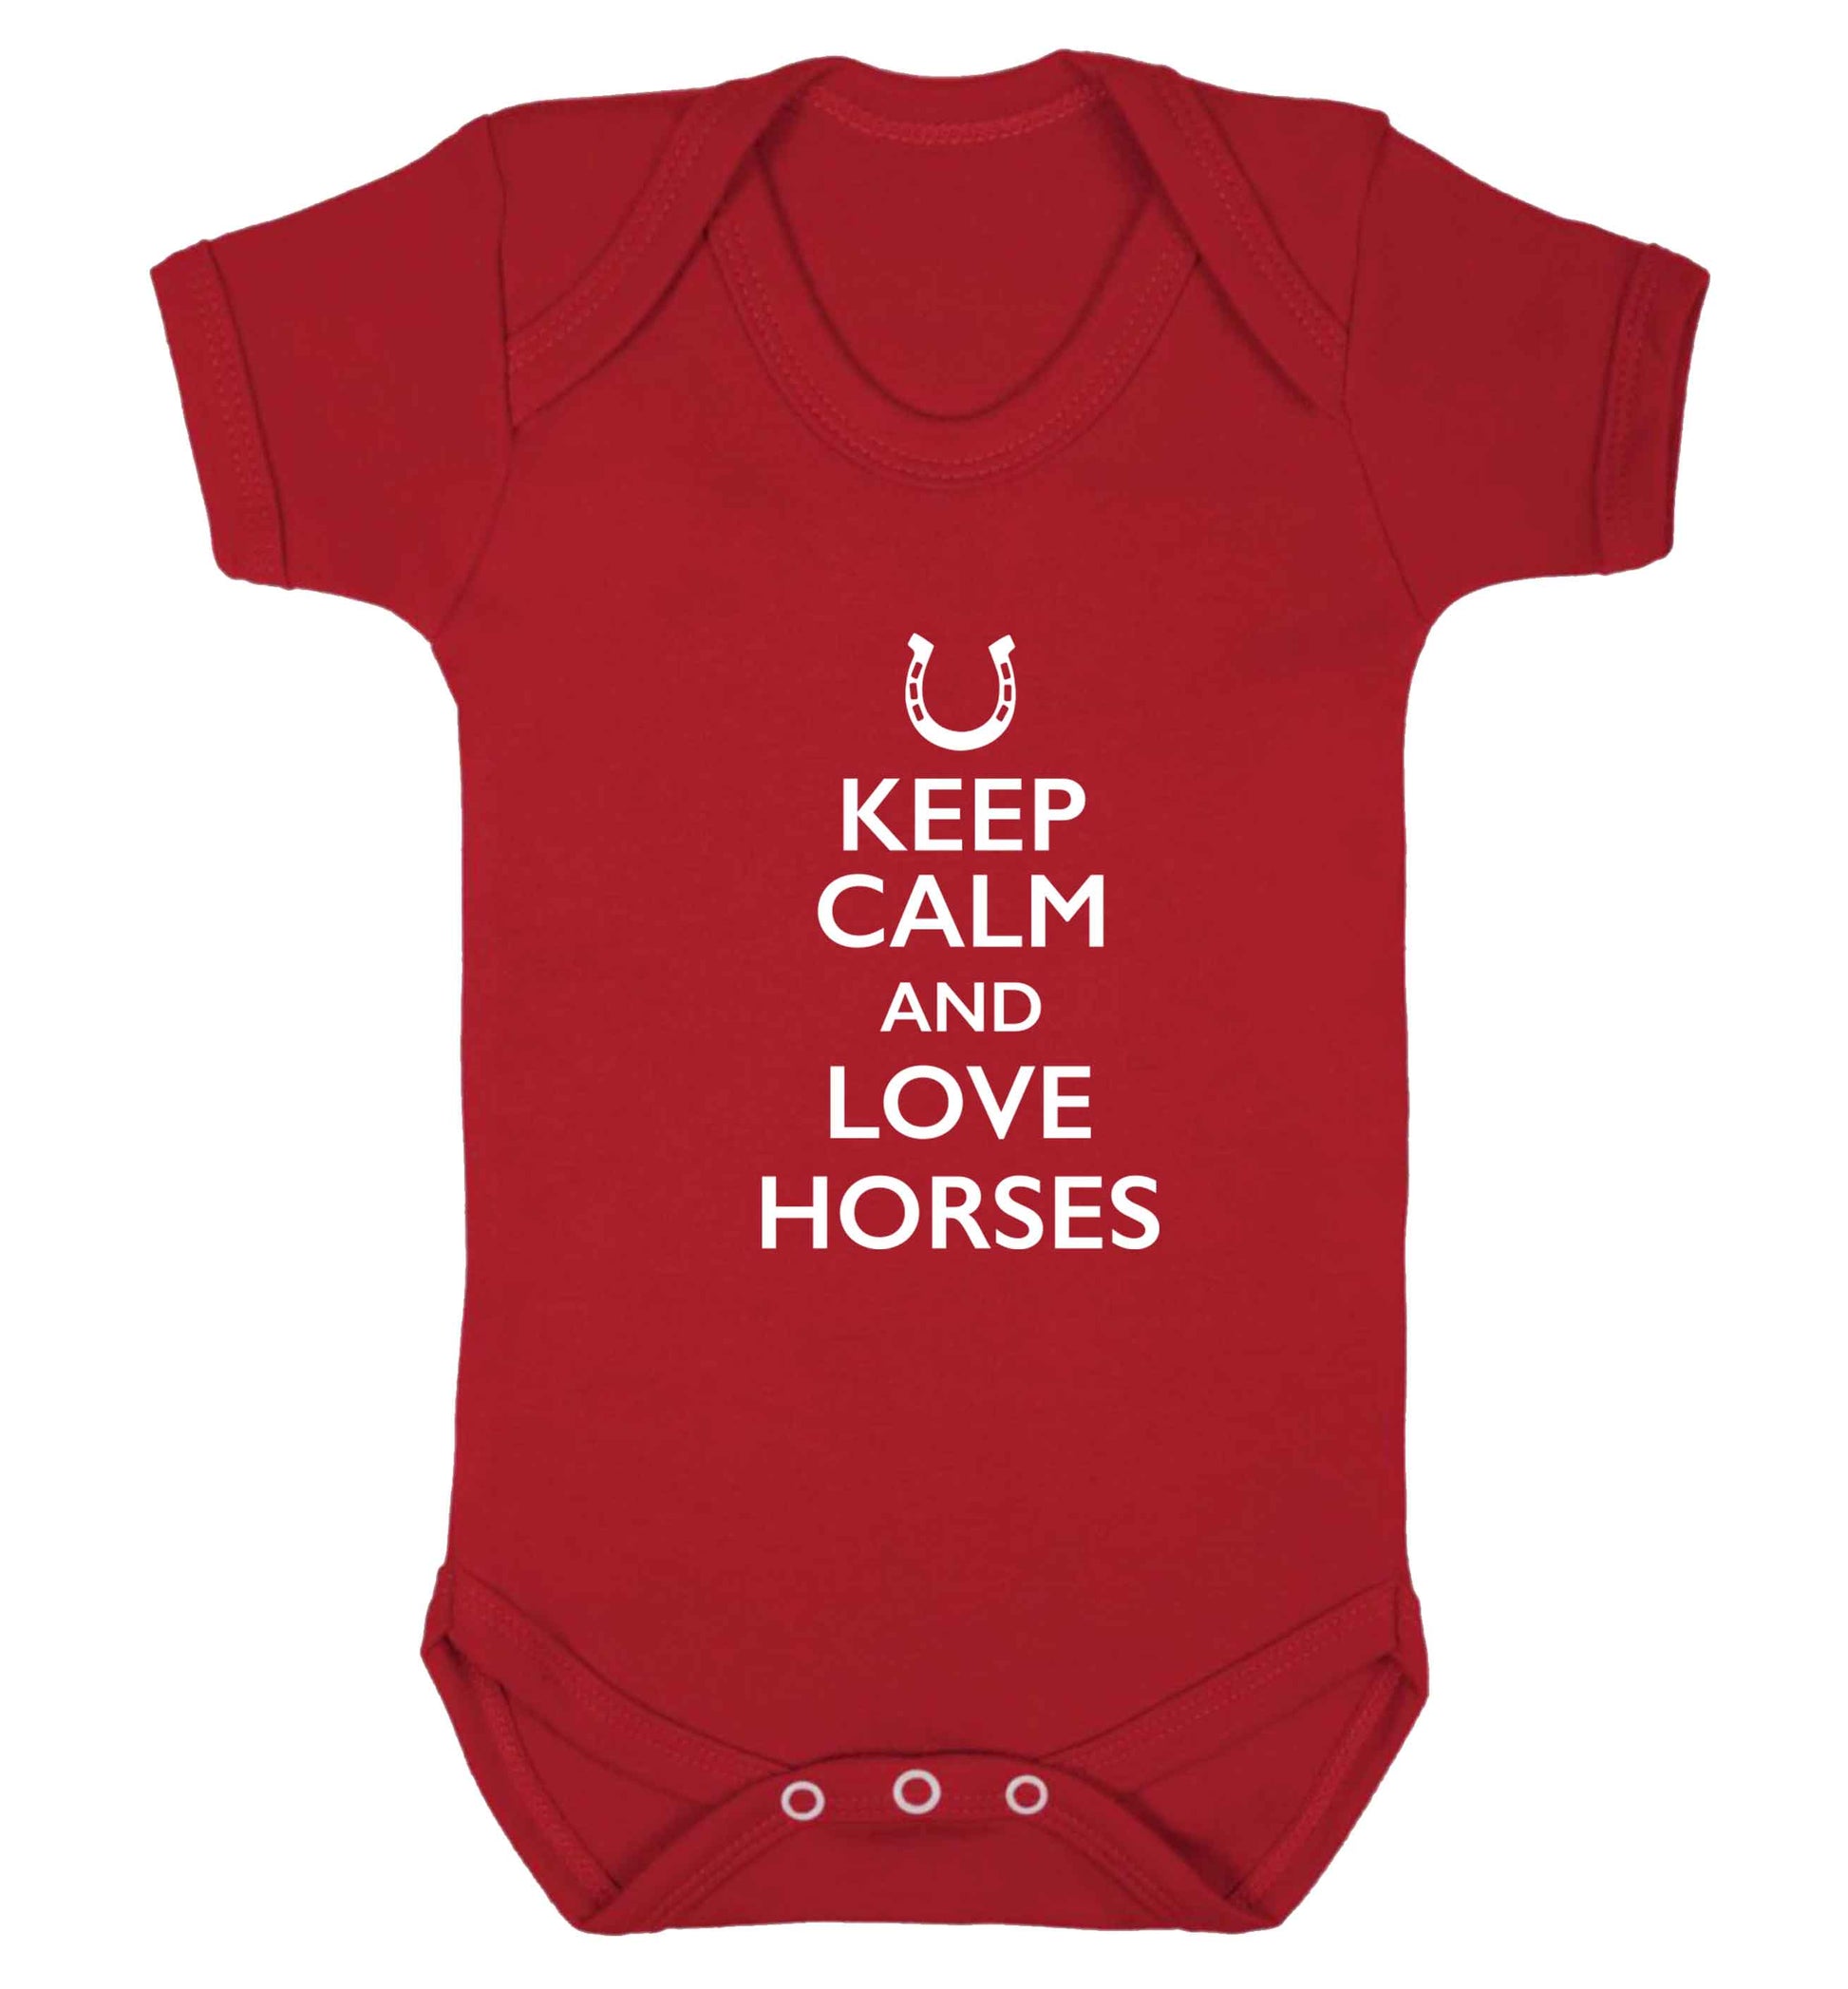 Keep calm and love horses baby vest red 18-24 months